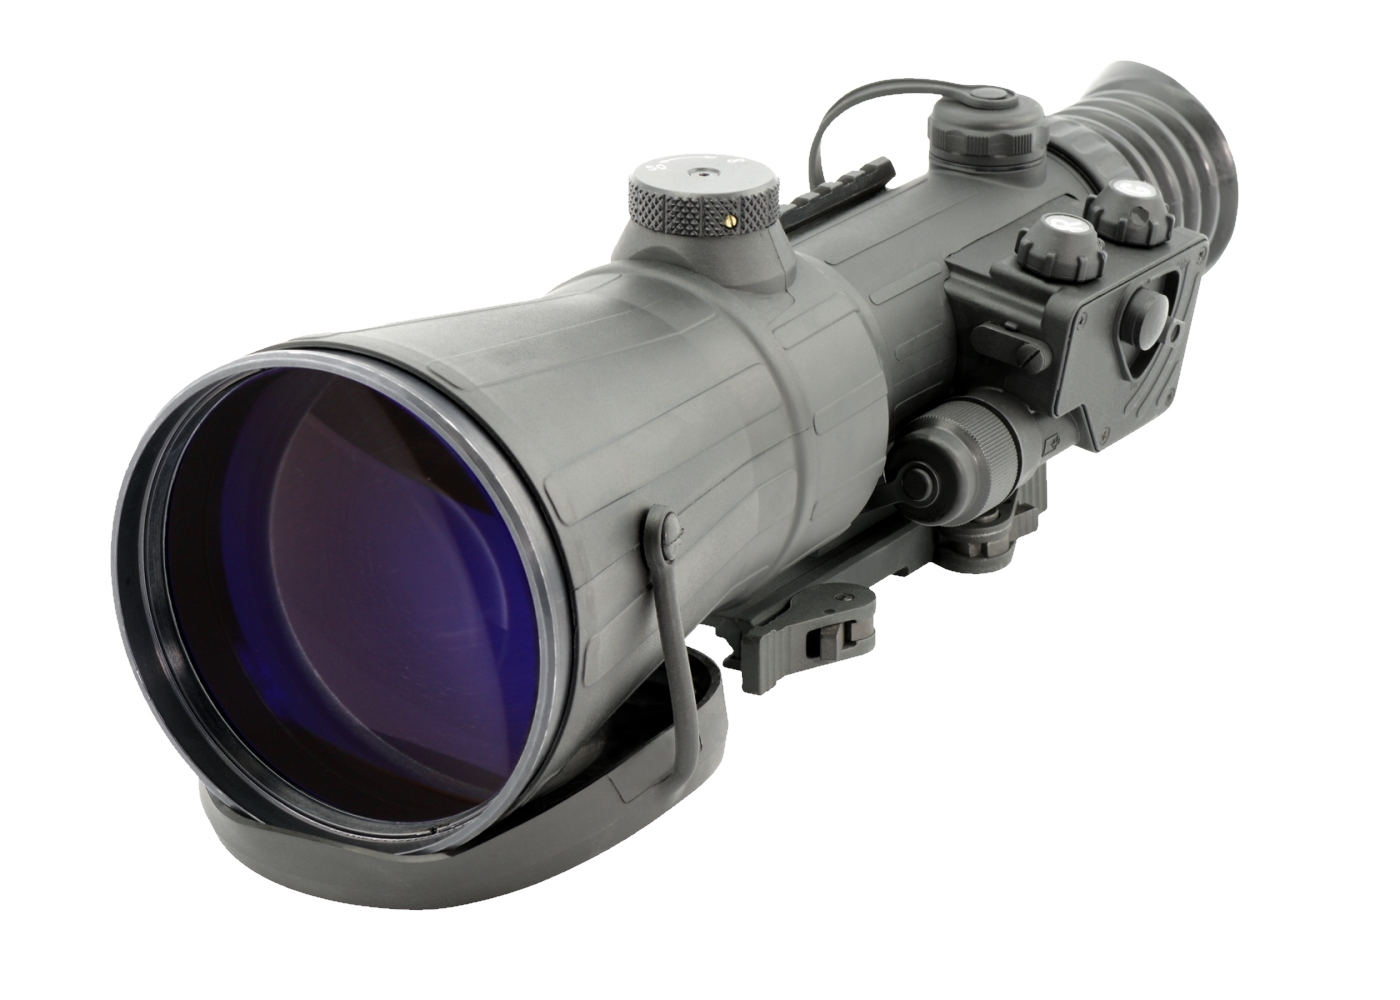 Detect & recognise objects in total darkness Visionking 2x50 Night Vision Scope 